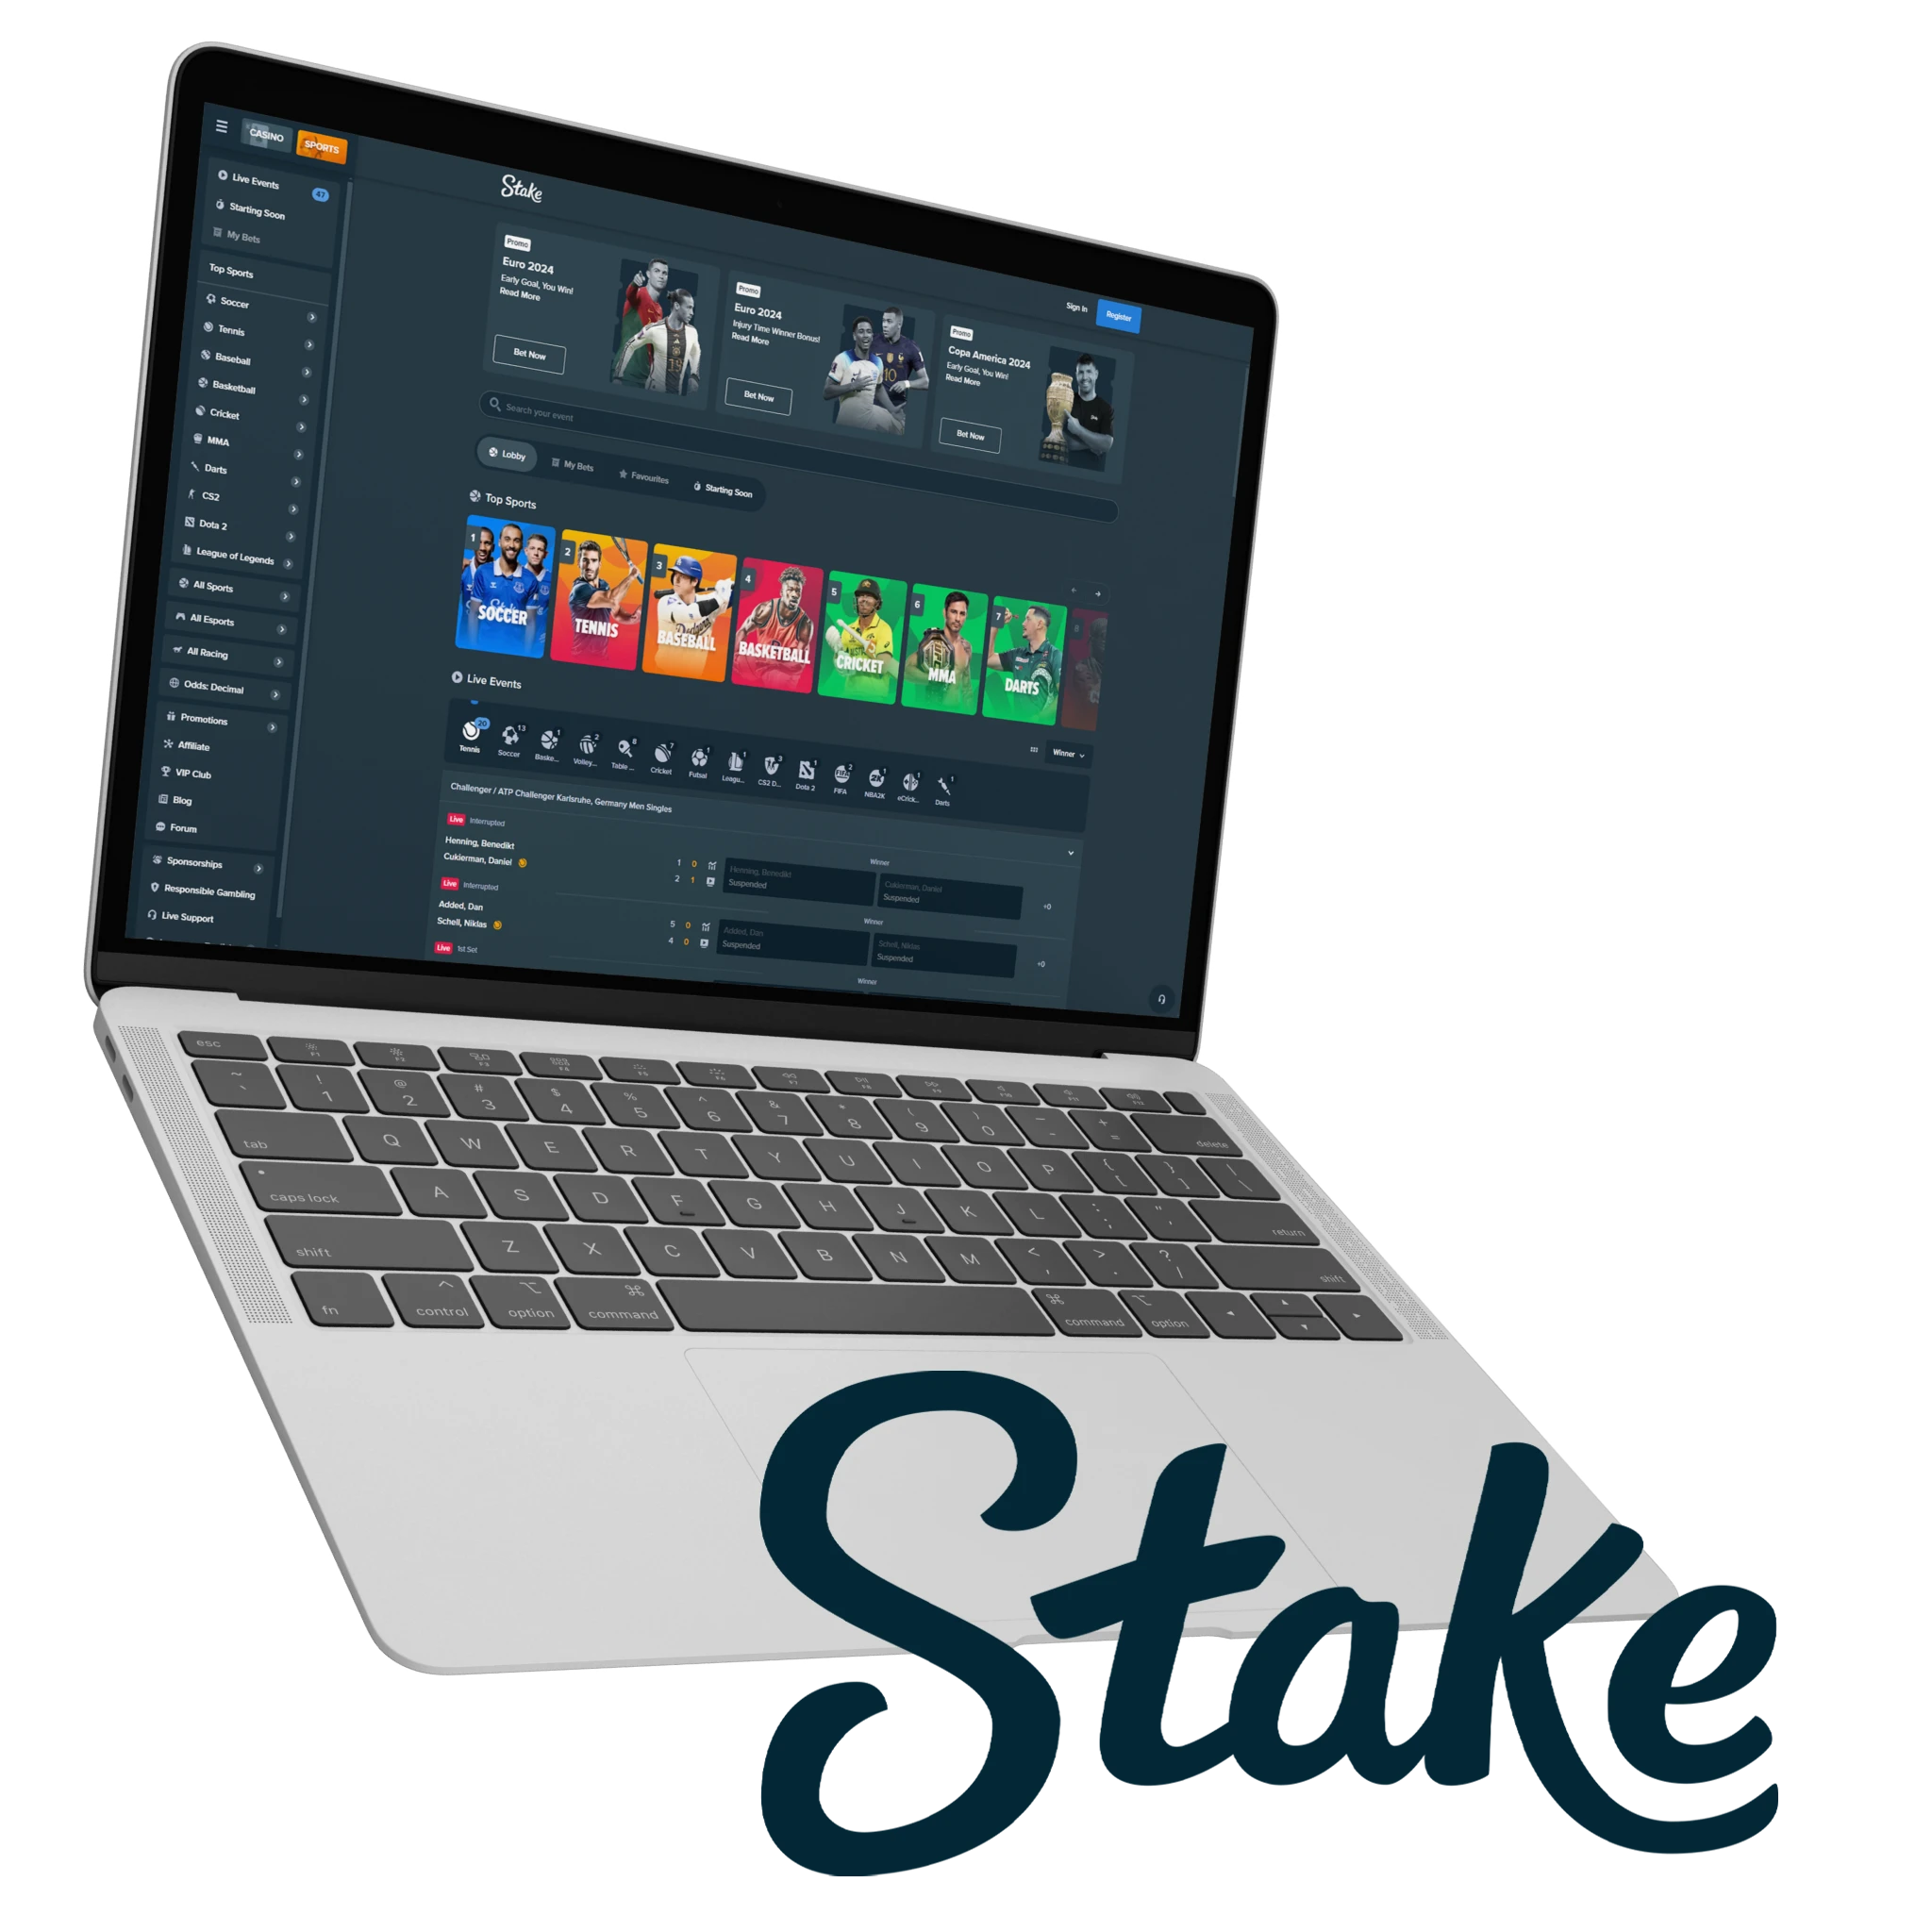 Stake is the platform to choose if the quality of sports betting is important to you.